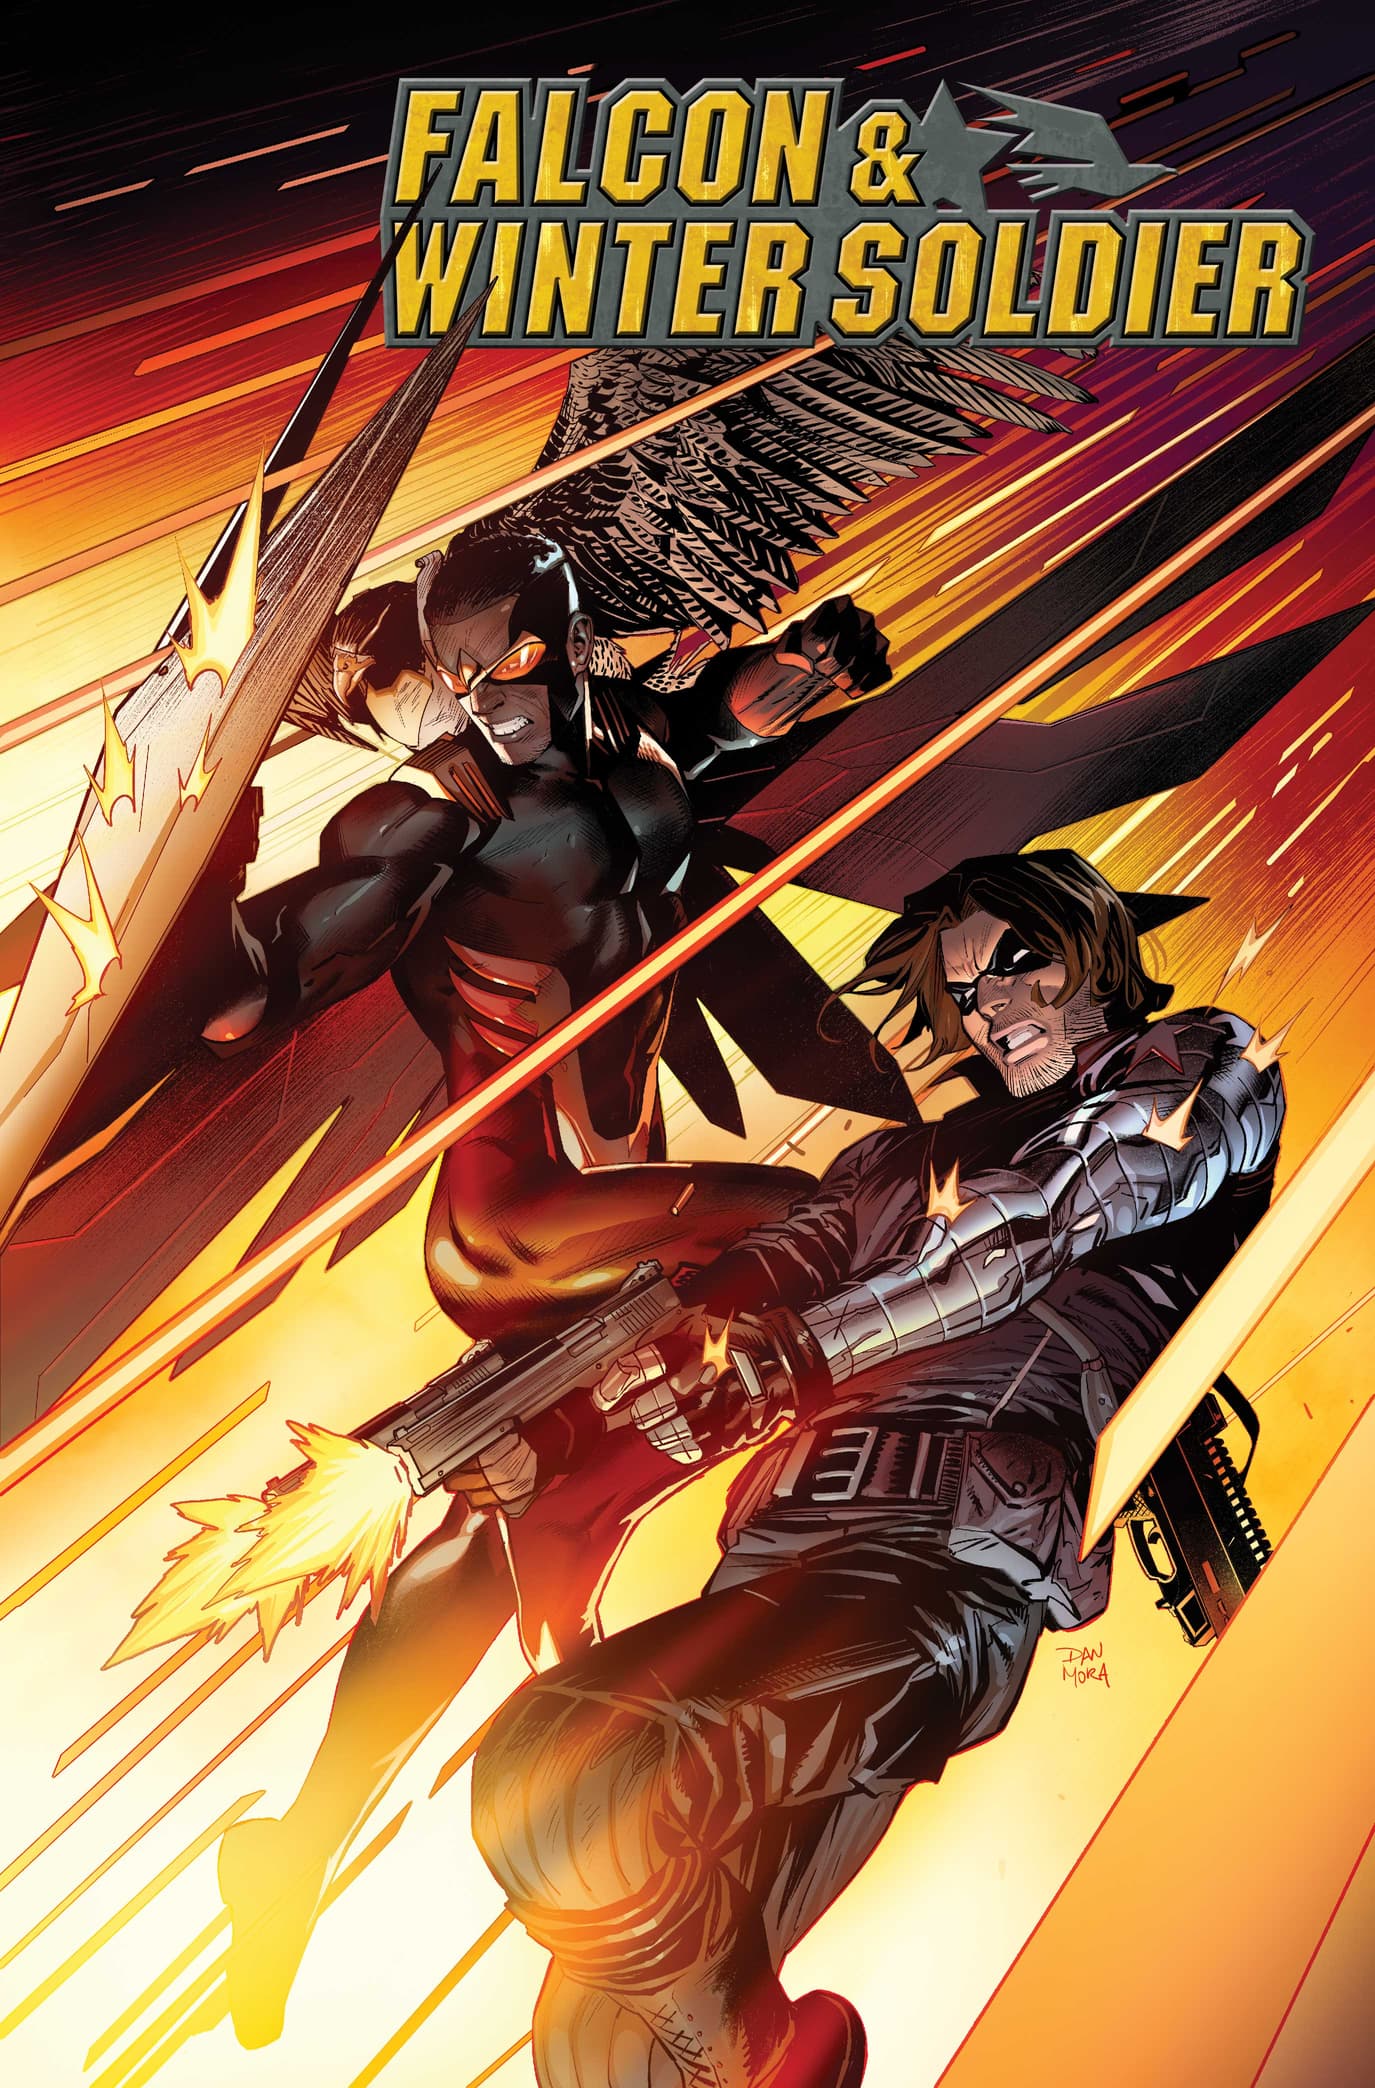 Falcon and Winter Soldier #1